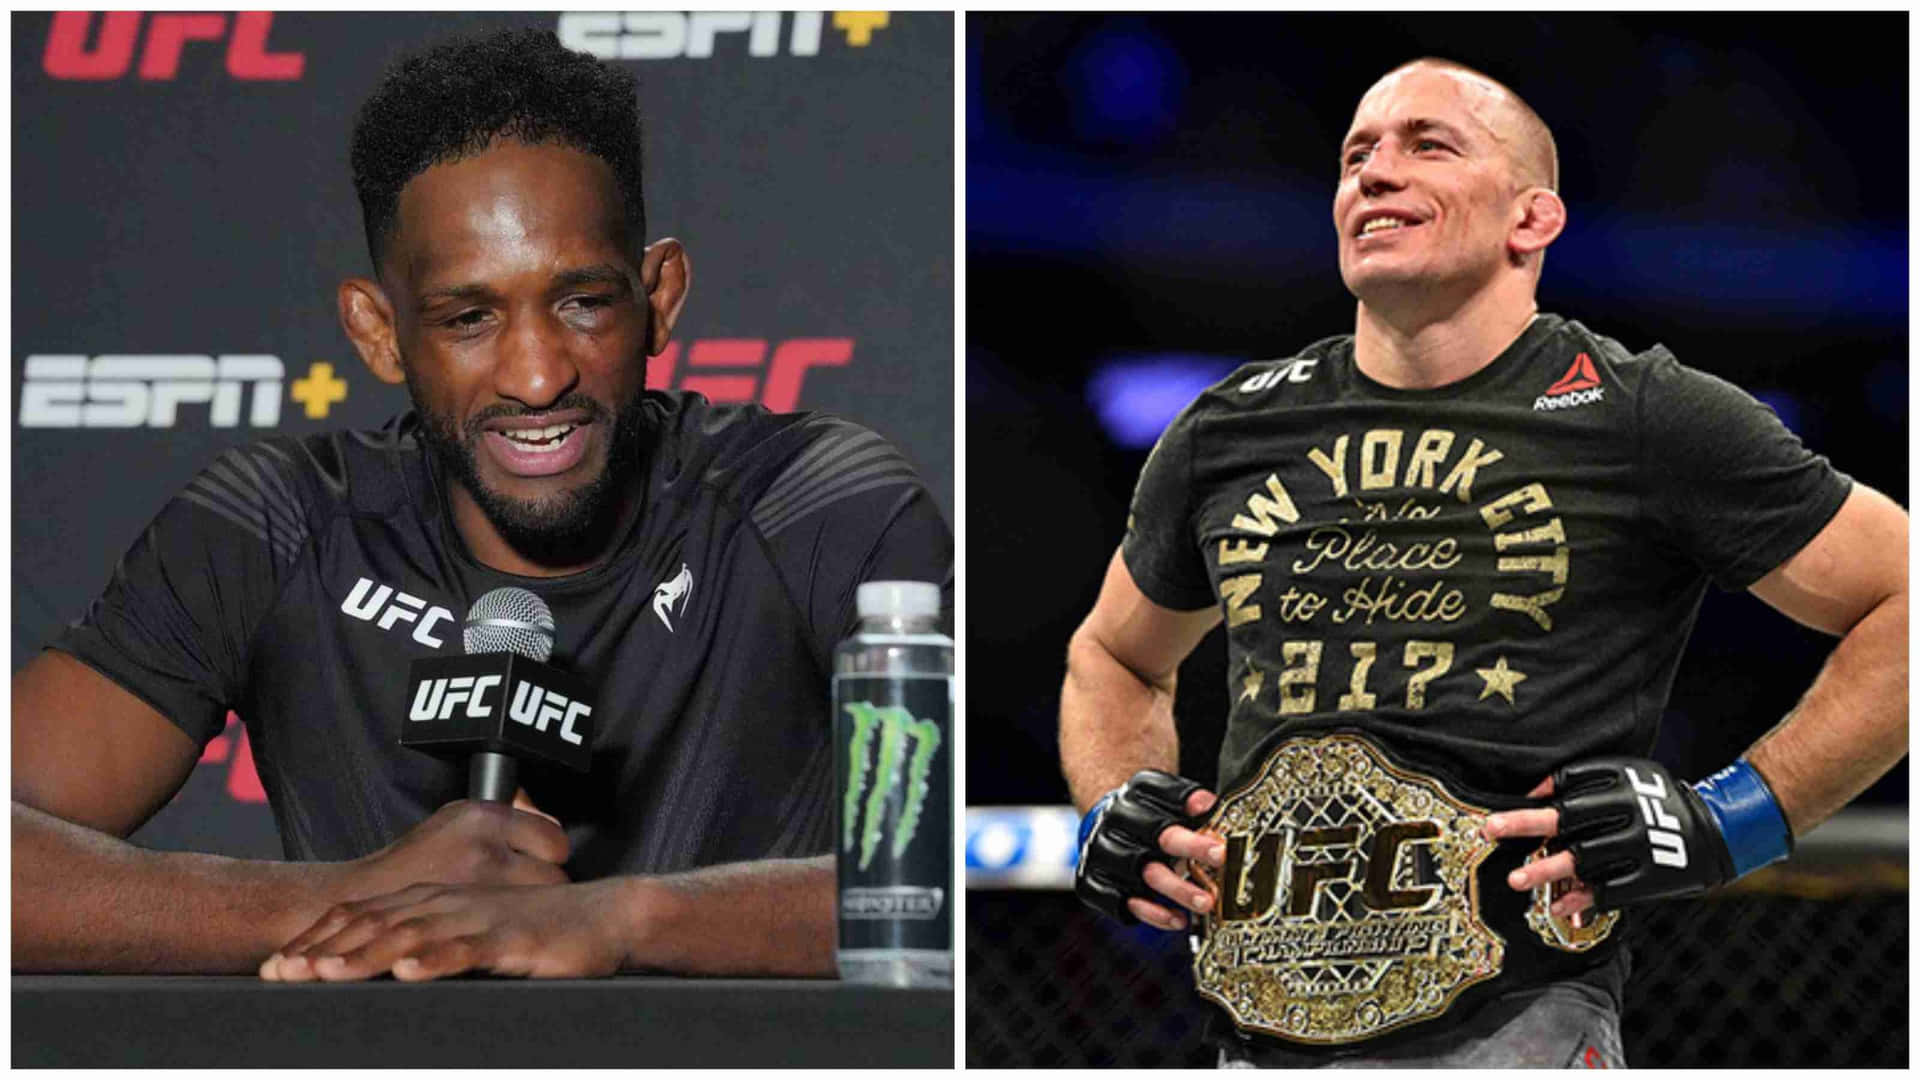 Neil Magny Georges St-pierre Wallpaper